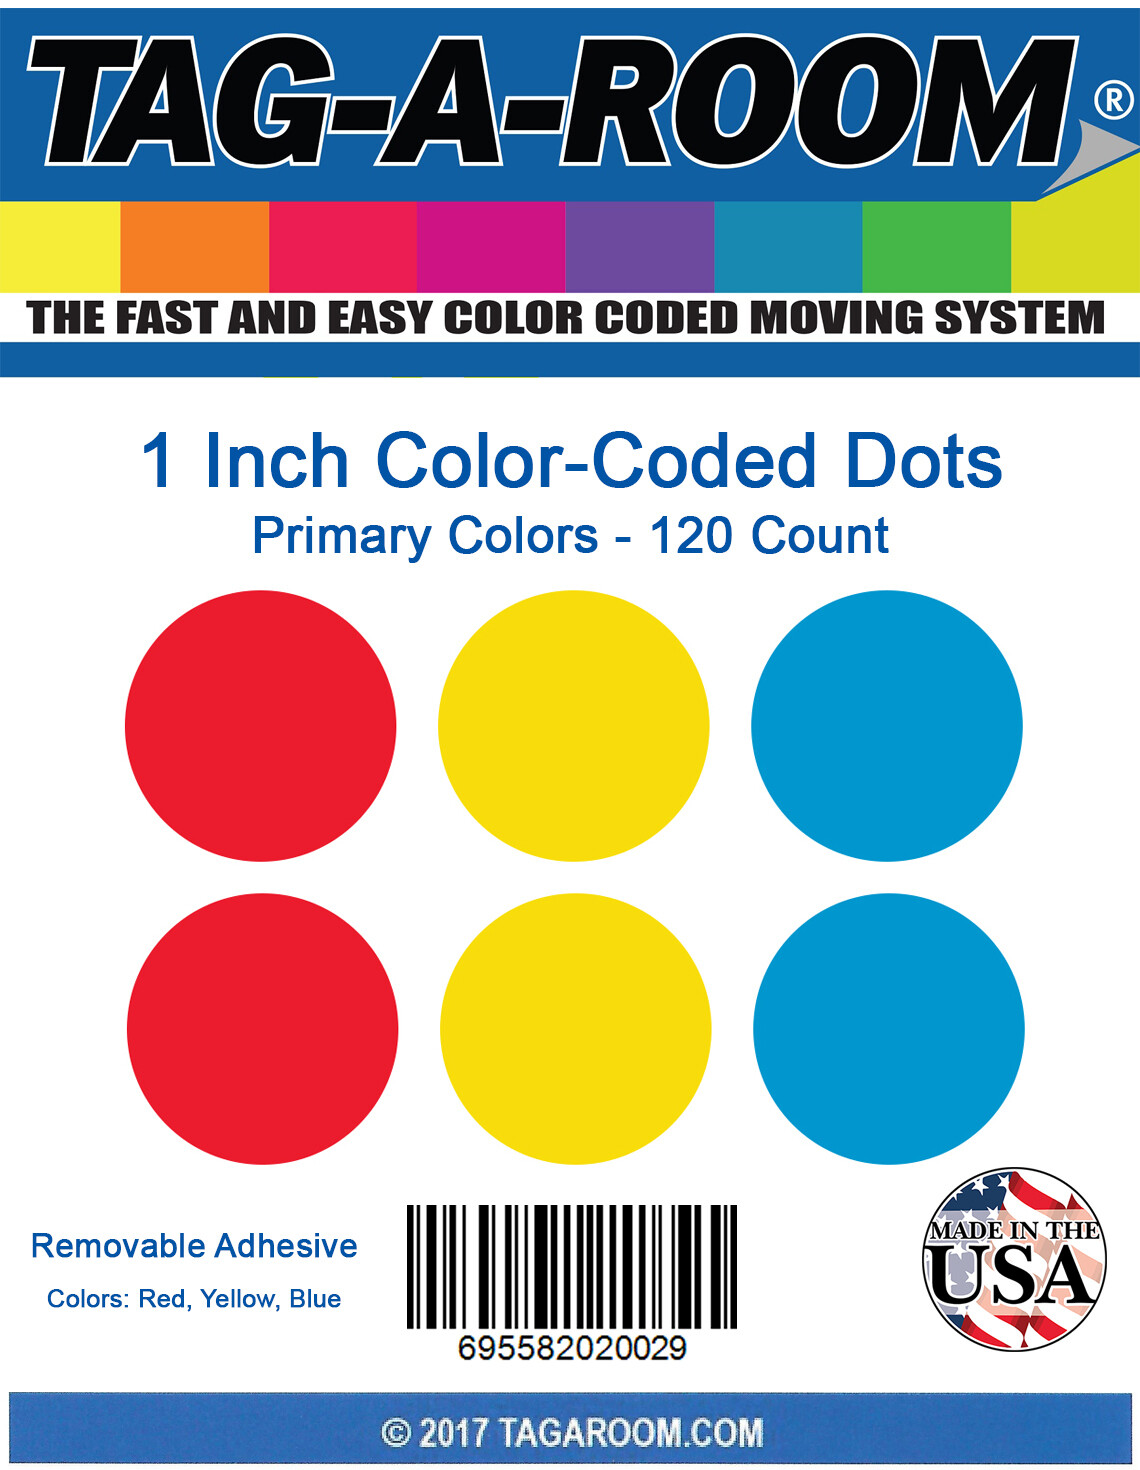 Tag-A-Room 1 Inch Round Color Coding Circle Dot Label Stickers, 3 Primary Colors, 4